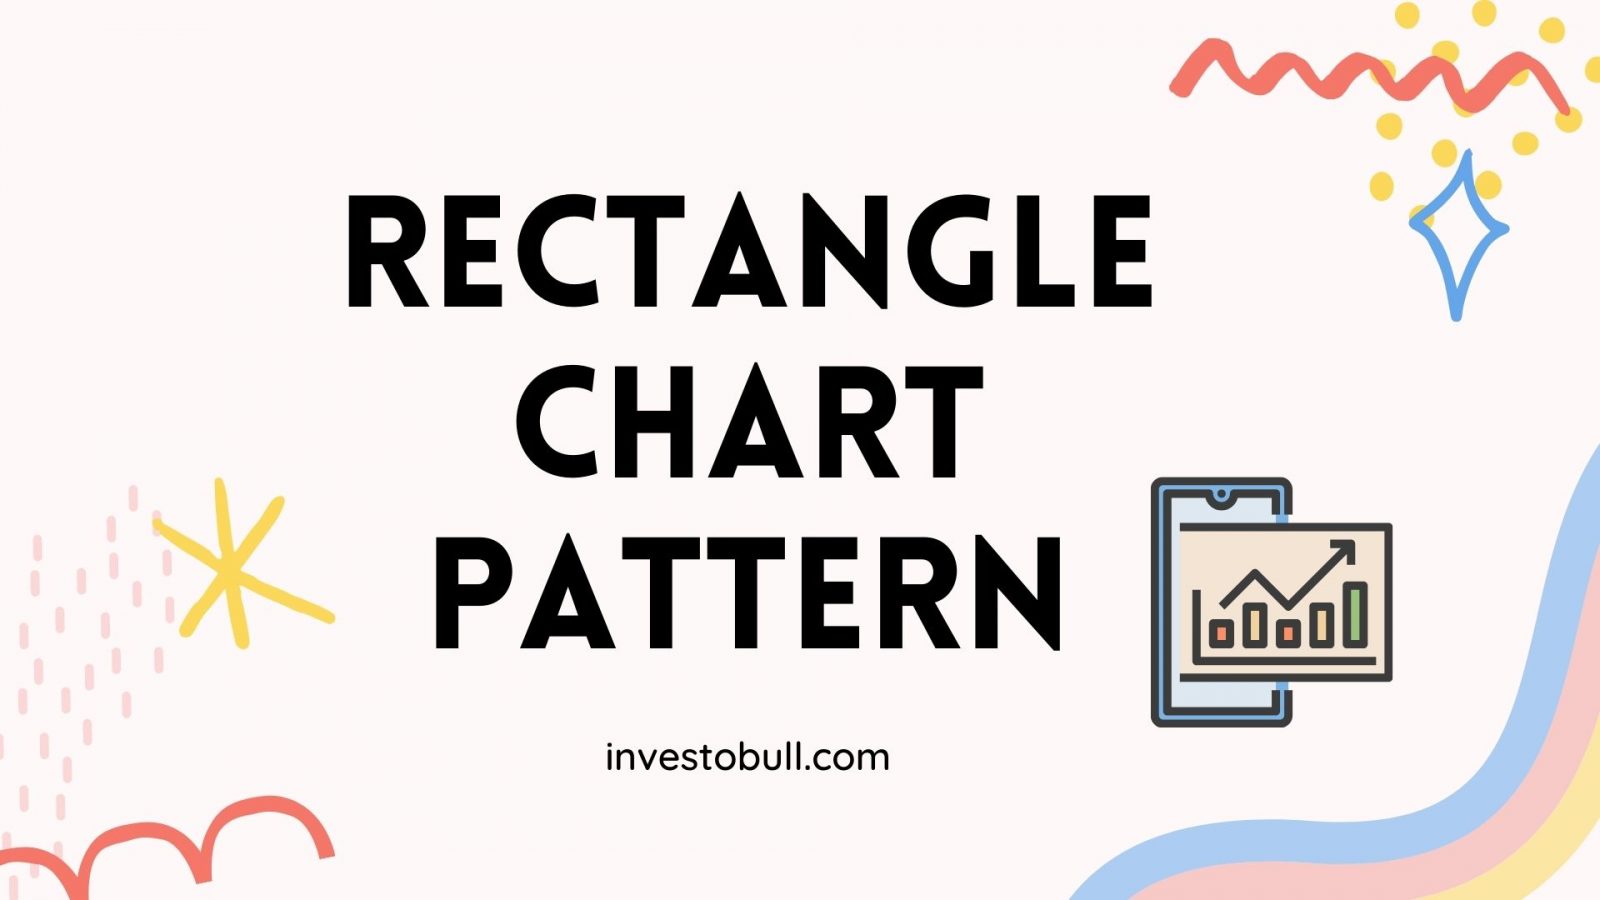 What is Rectangle Chart Pattern